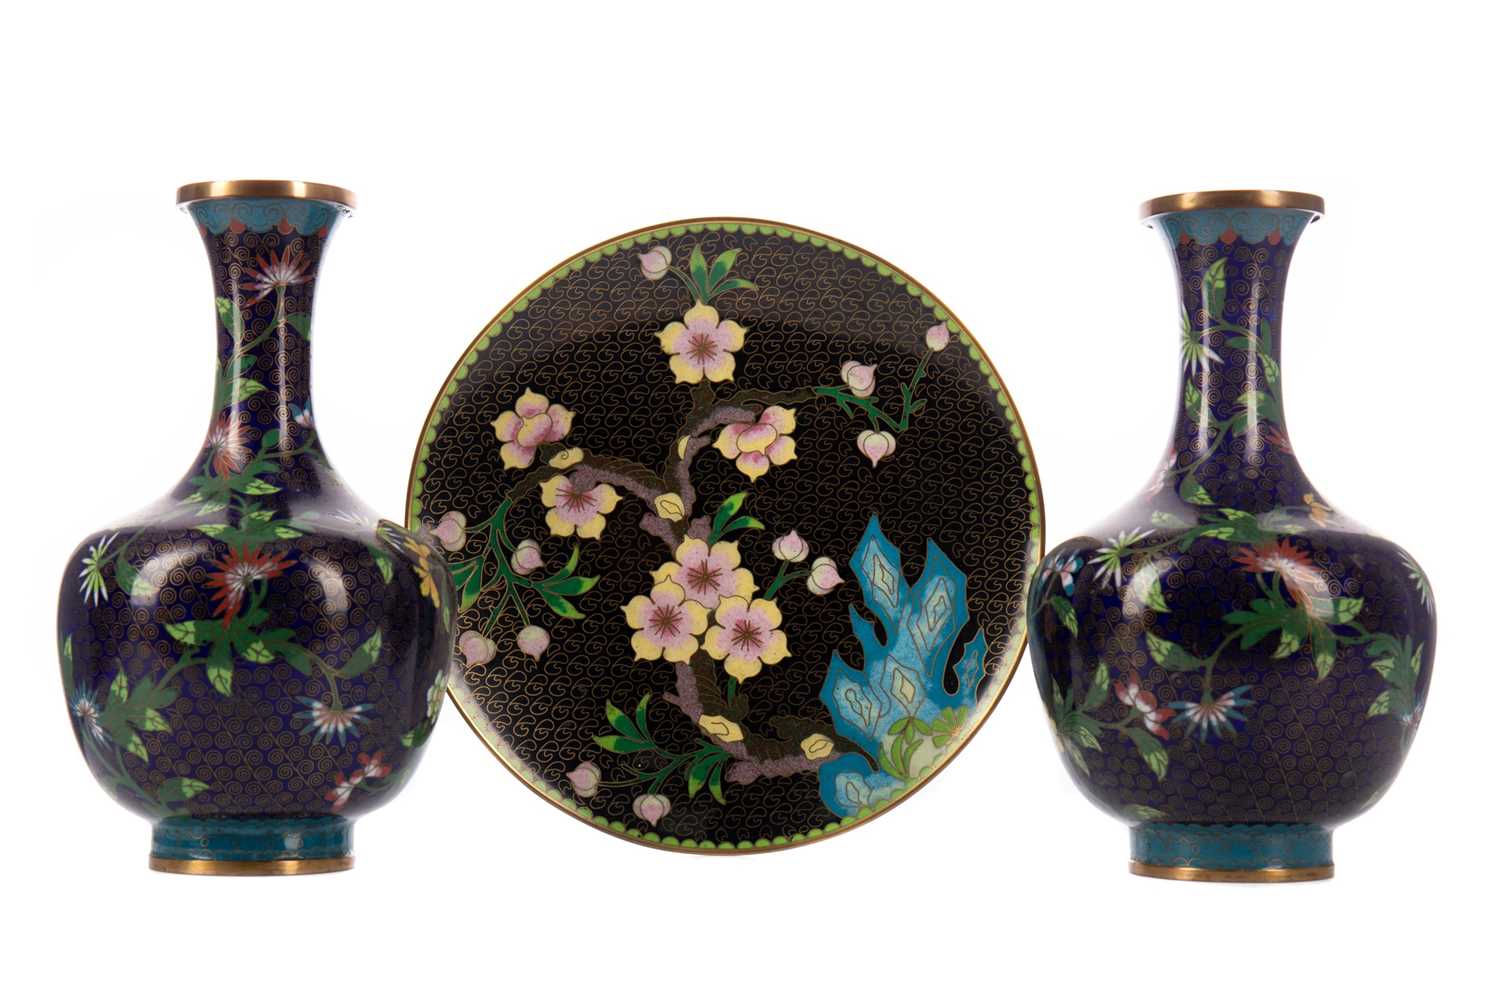 Lot 1842 - A PAIR OF 20TH CENTURY CHINESE CLOISONNE VASES AND A CLOISONNE PLATE